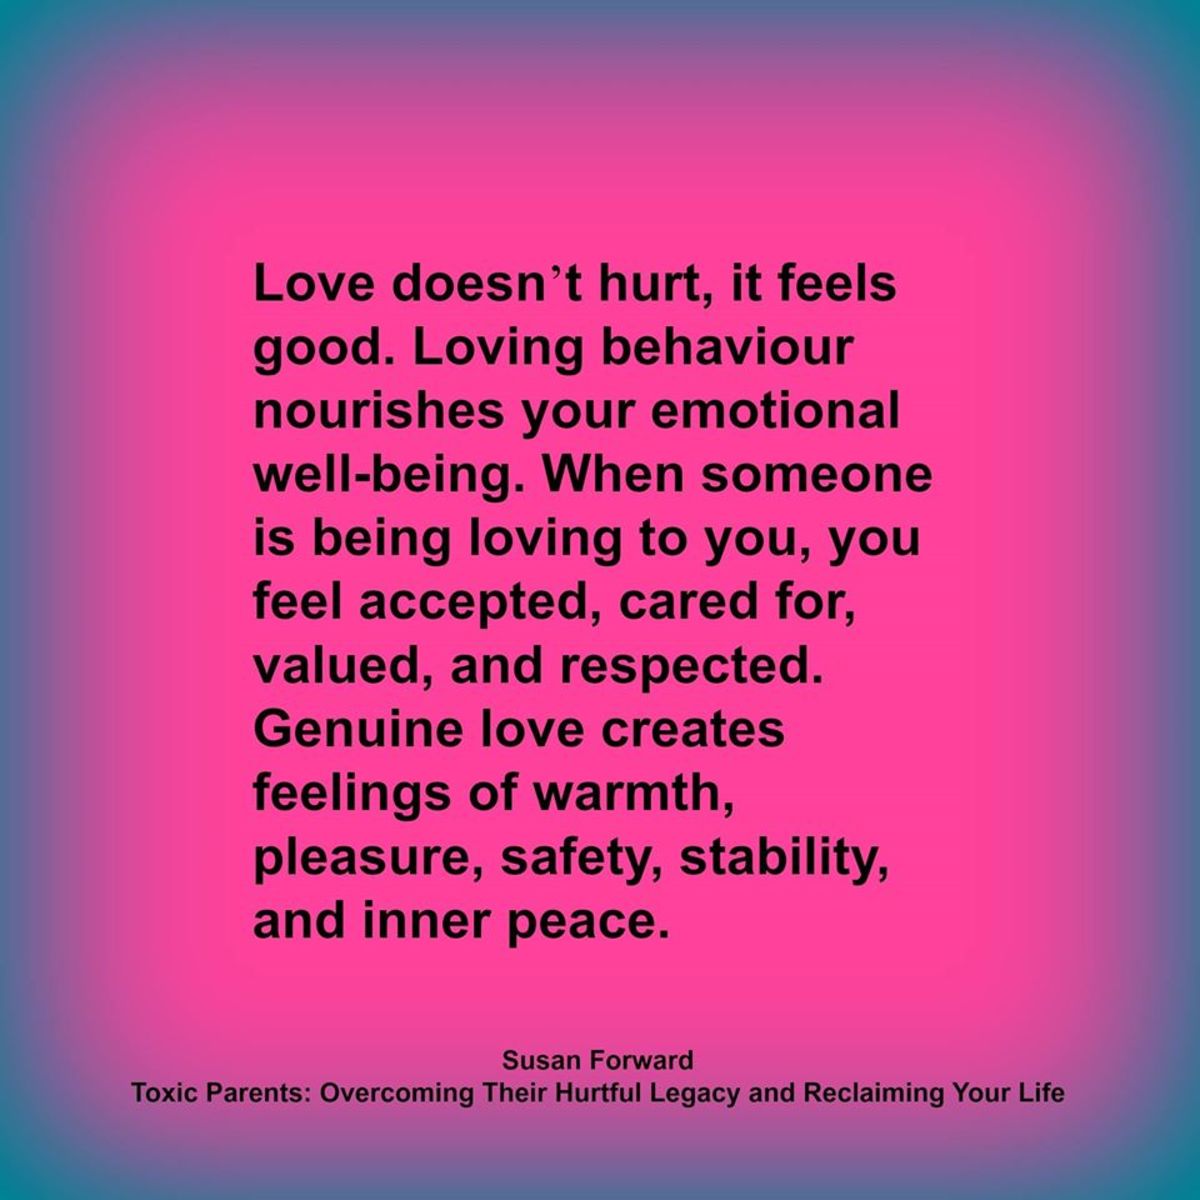 “Most adult children of toxic parents grow up feeling tremendous confusion about what love means and how it’s supposed to feel. Their parents did extremely unloving things to them in the name of love." Susan Forward